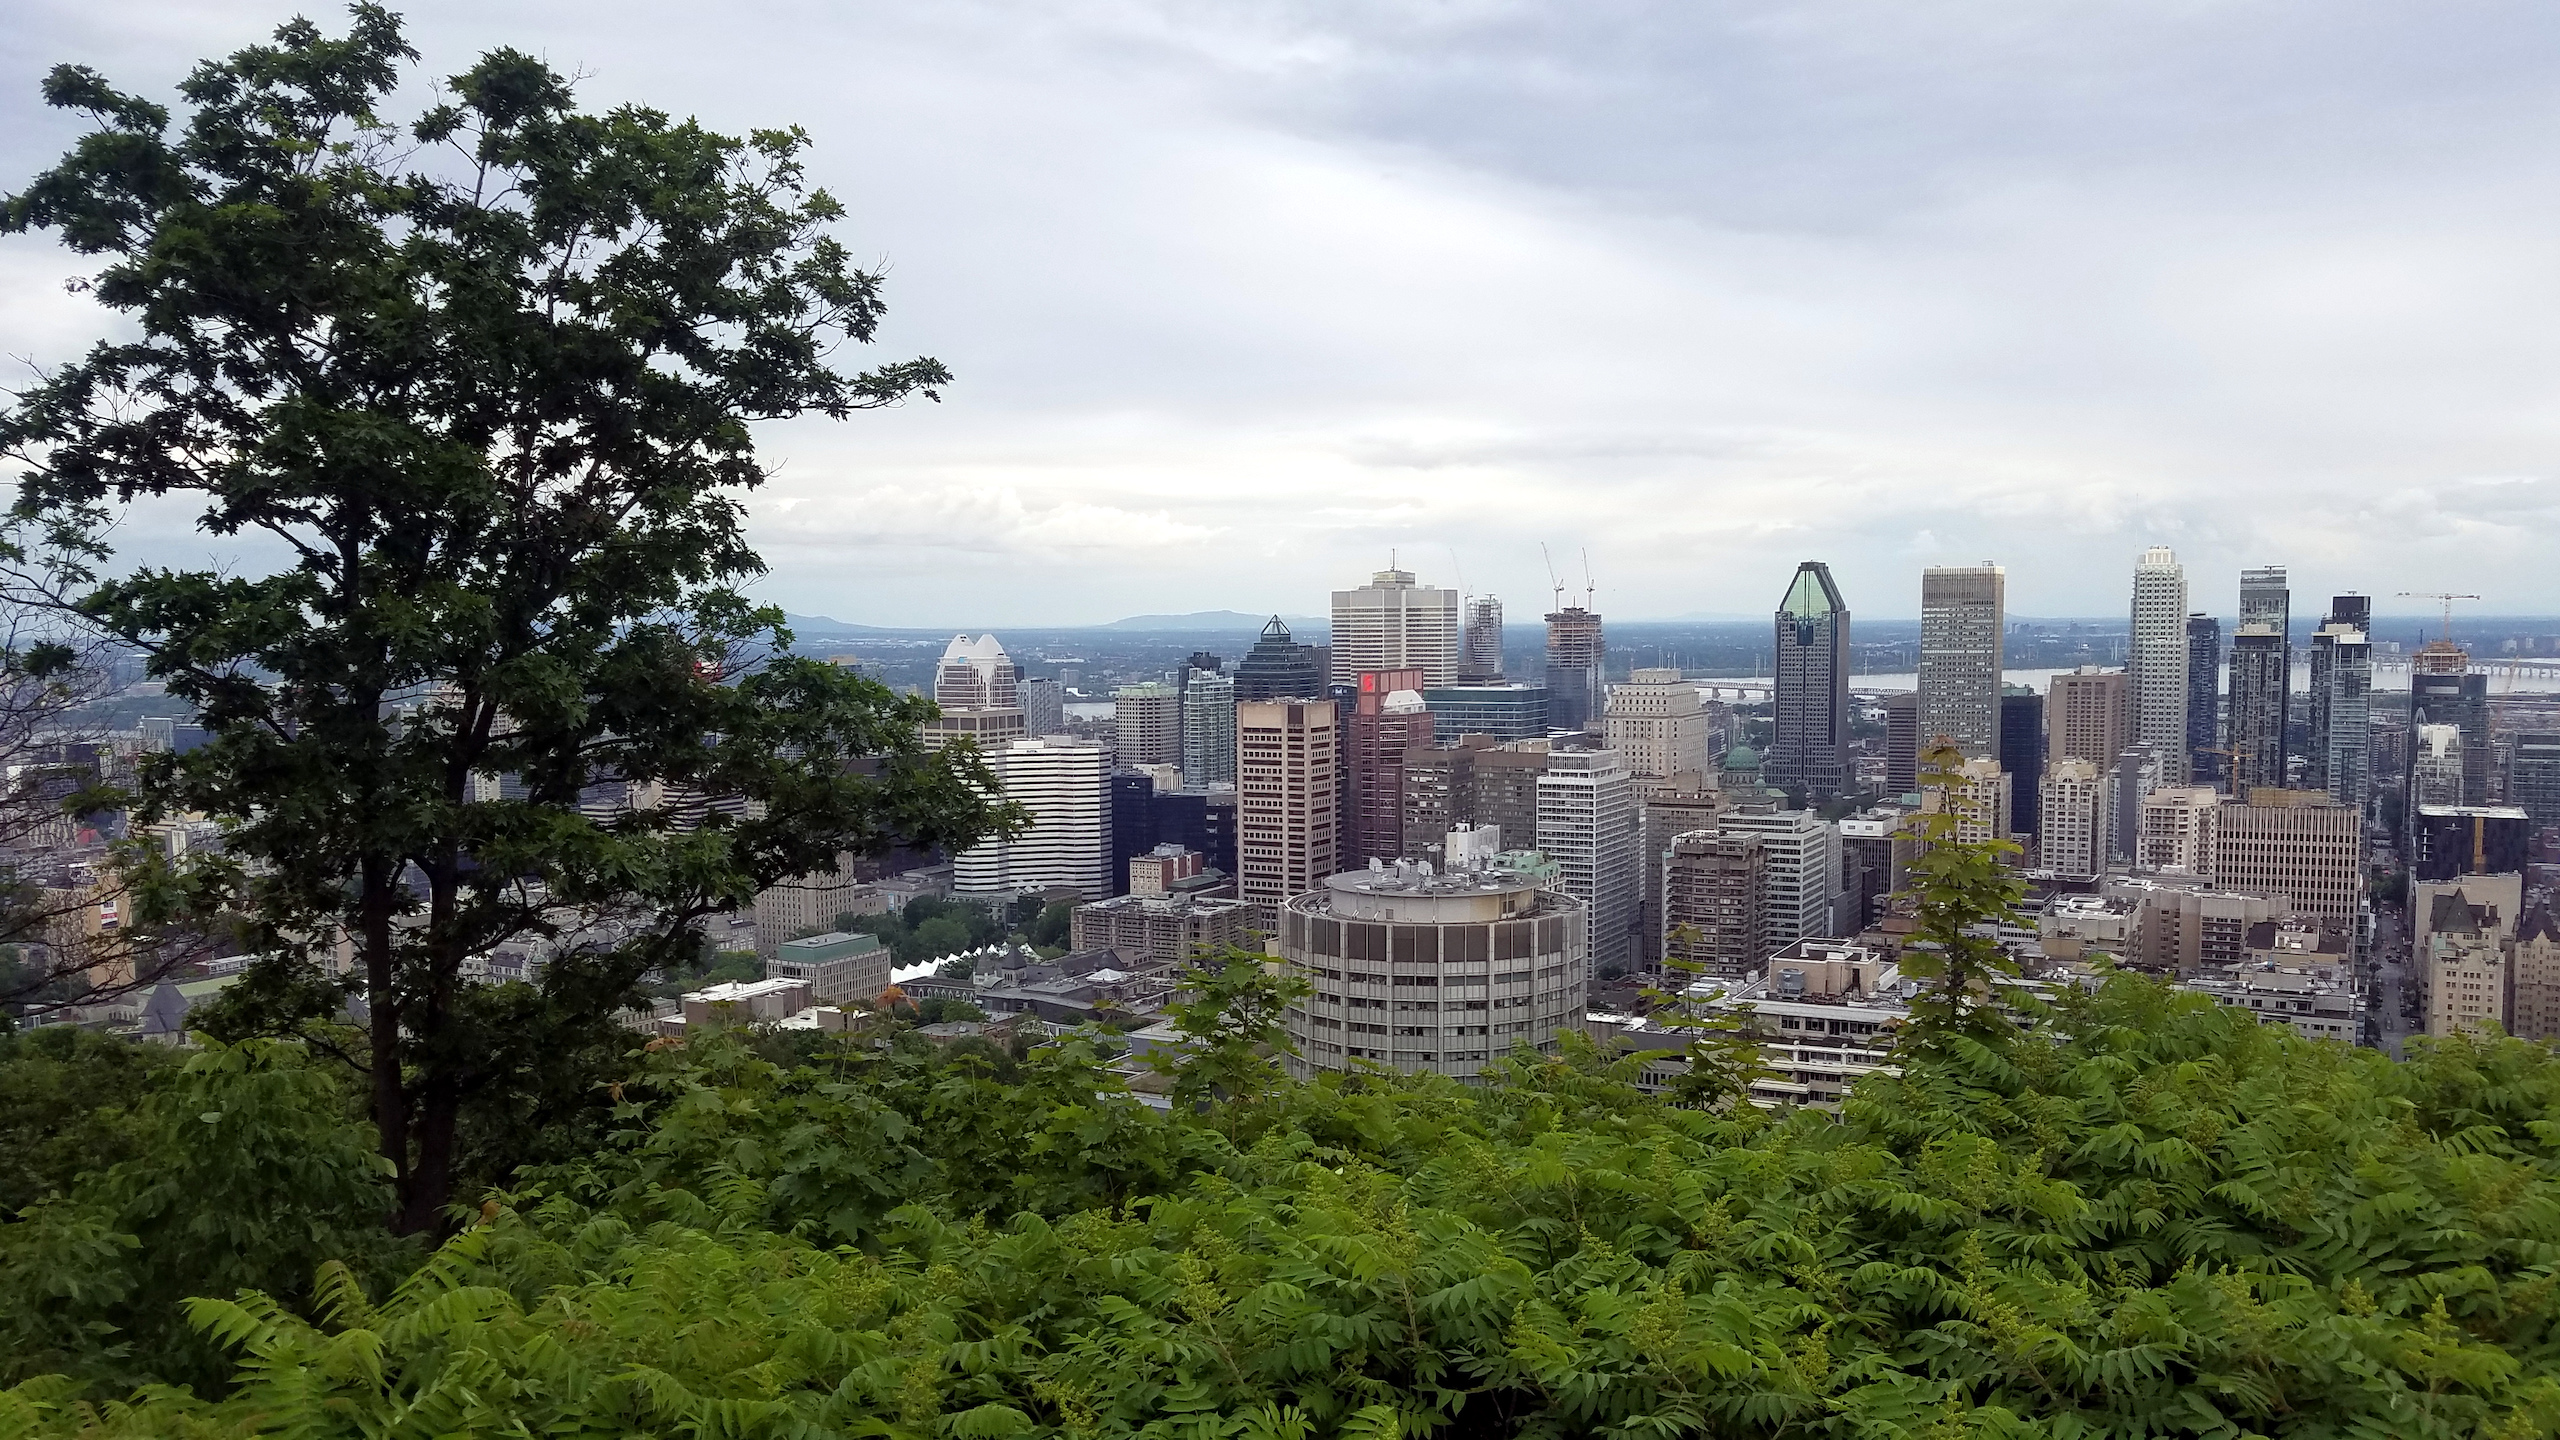 Skyline of Montreal, Canada, where COP15 biodiversity talks will be held in December 2022